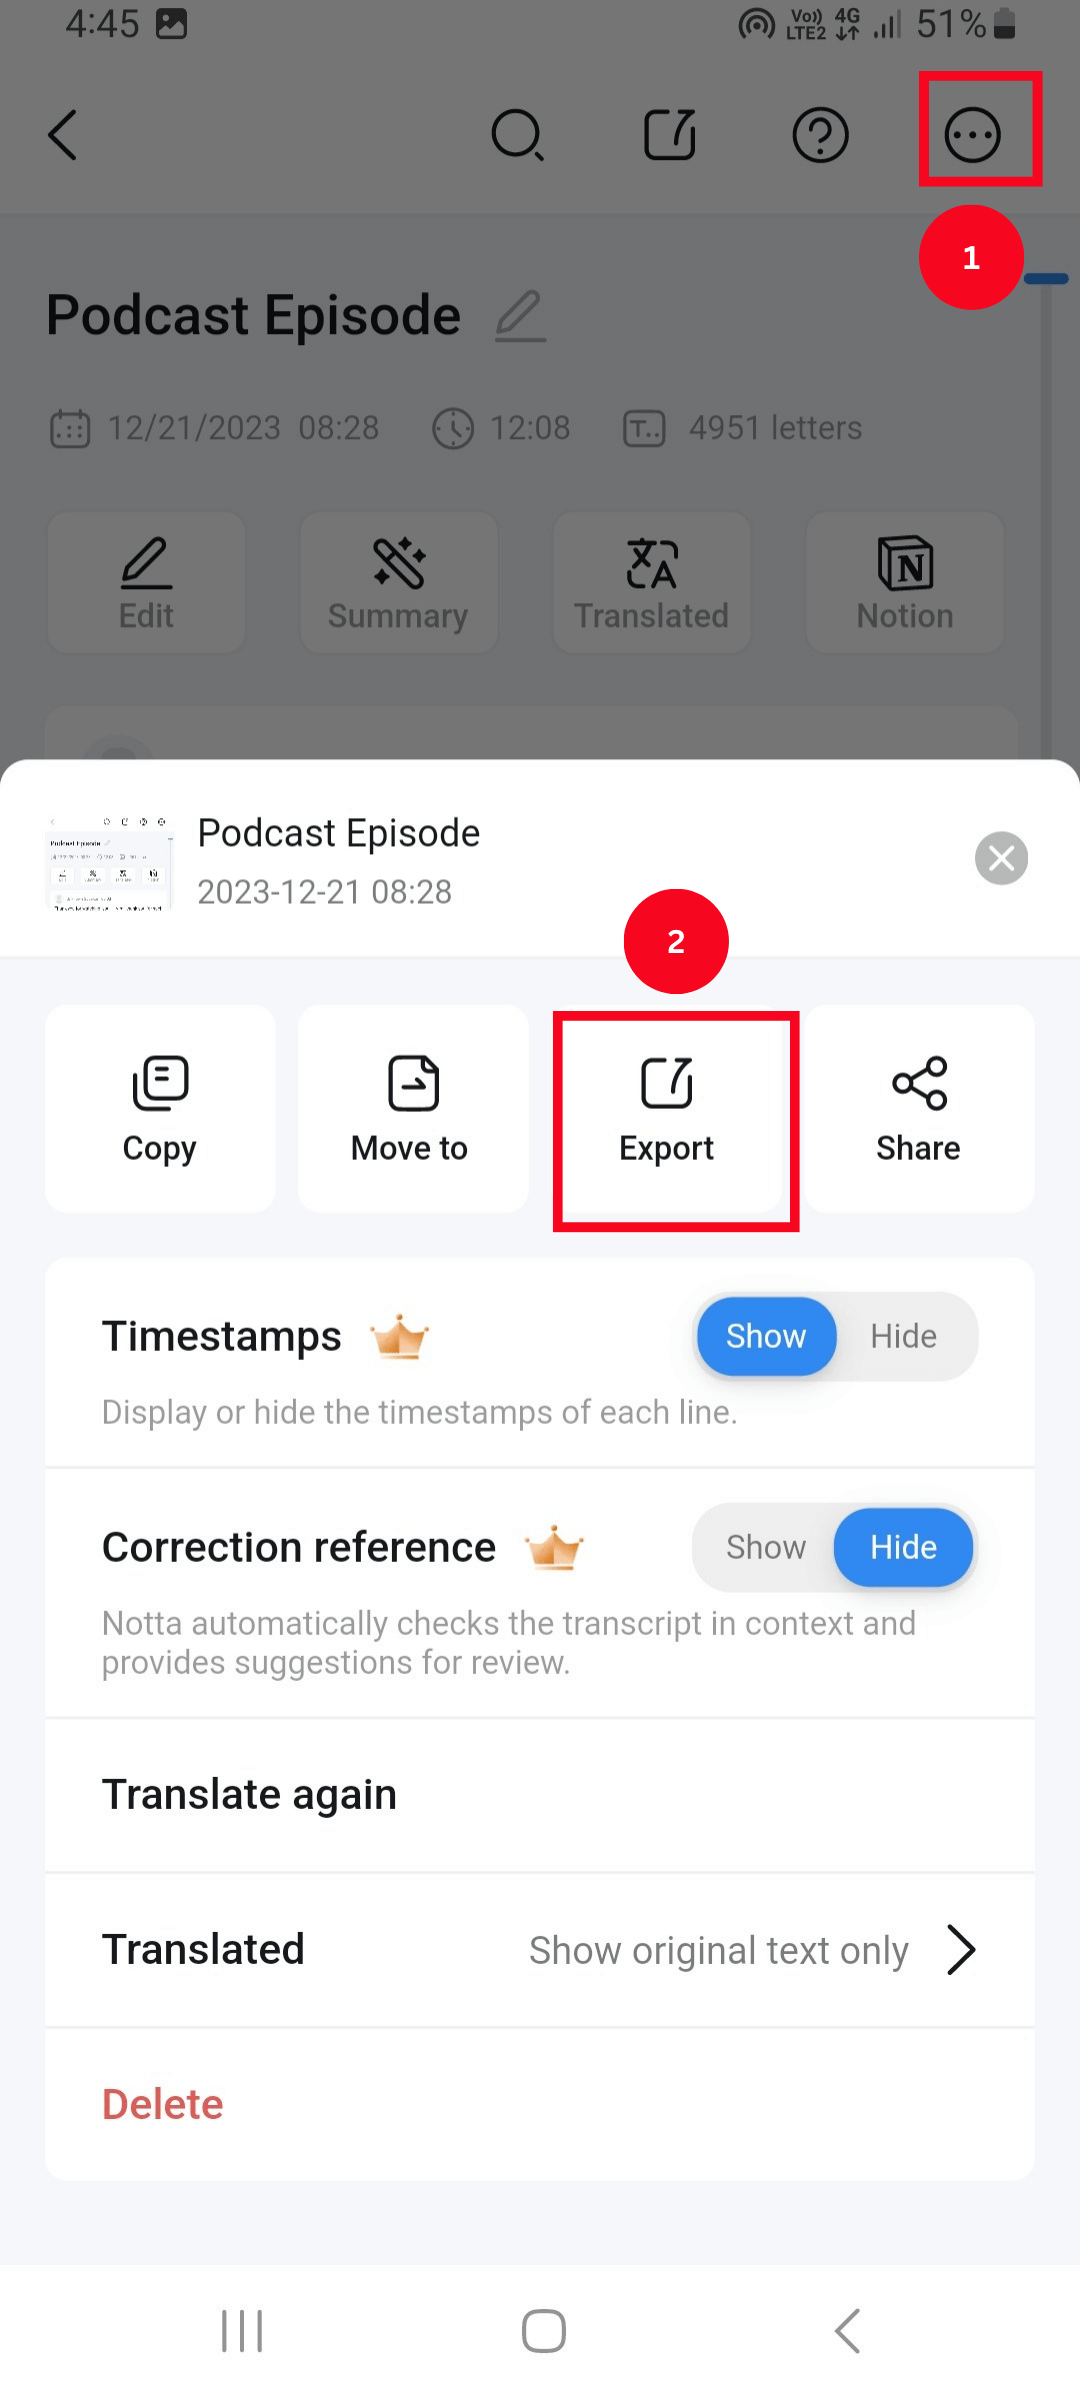 Click the three dots and select the Export option